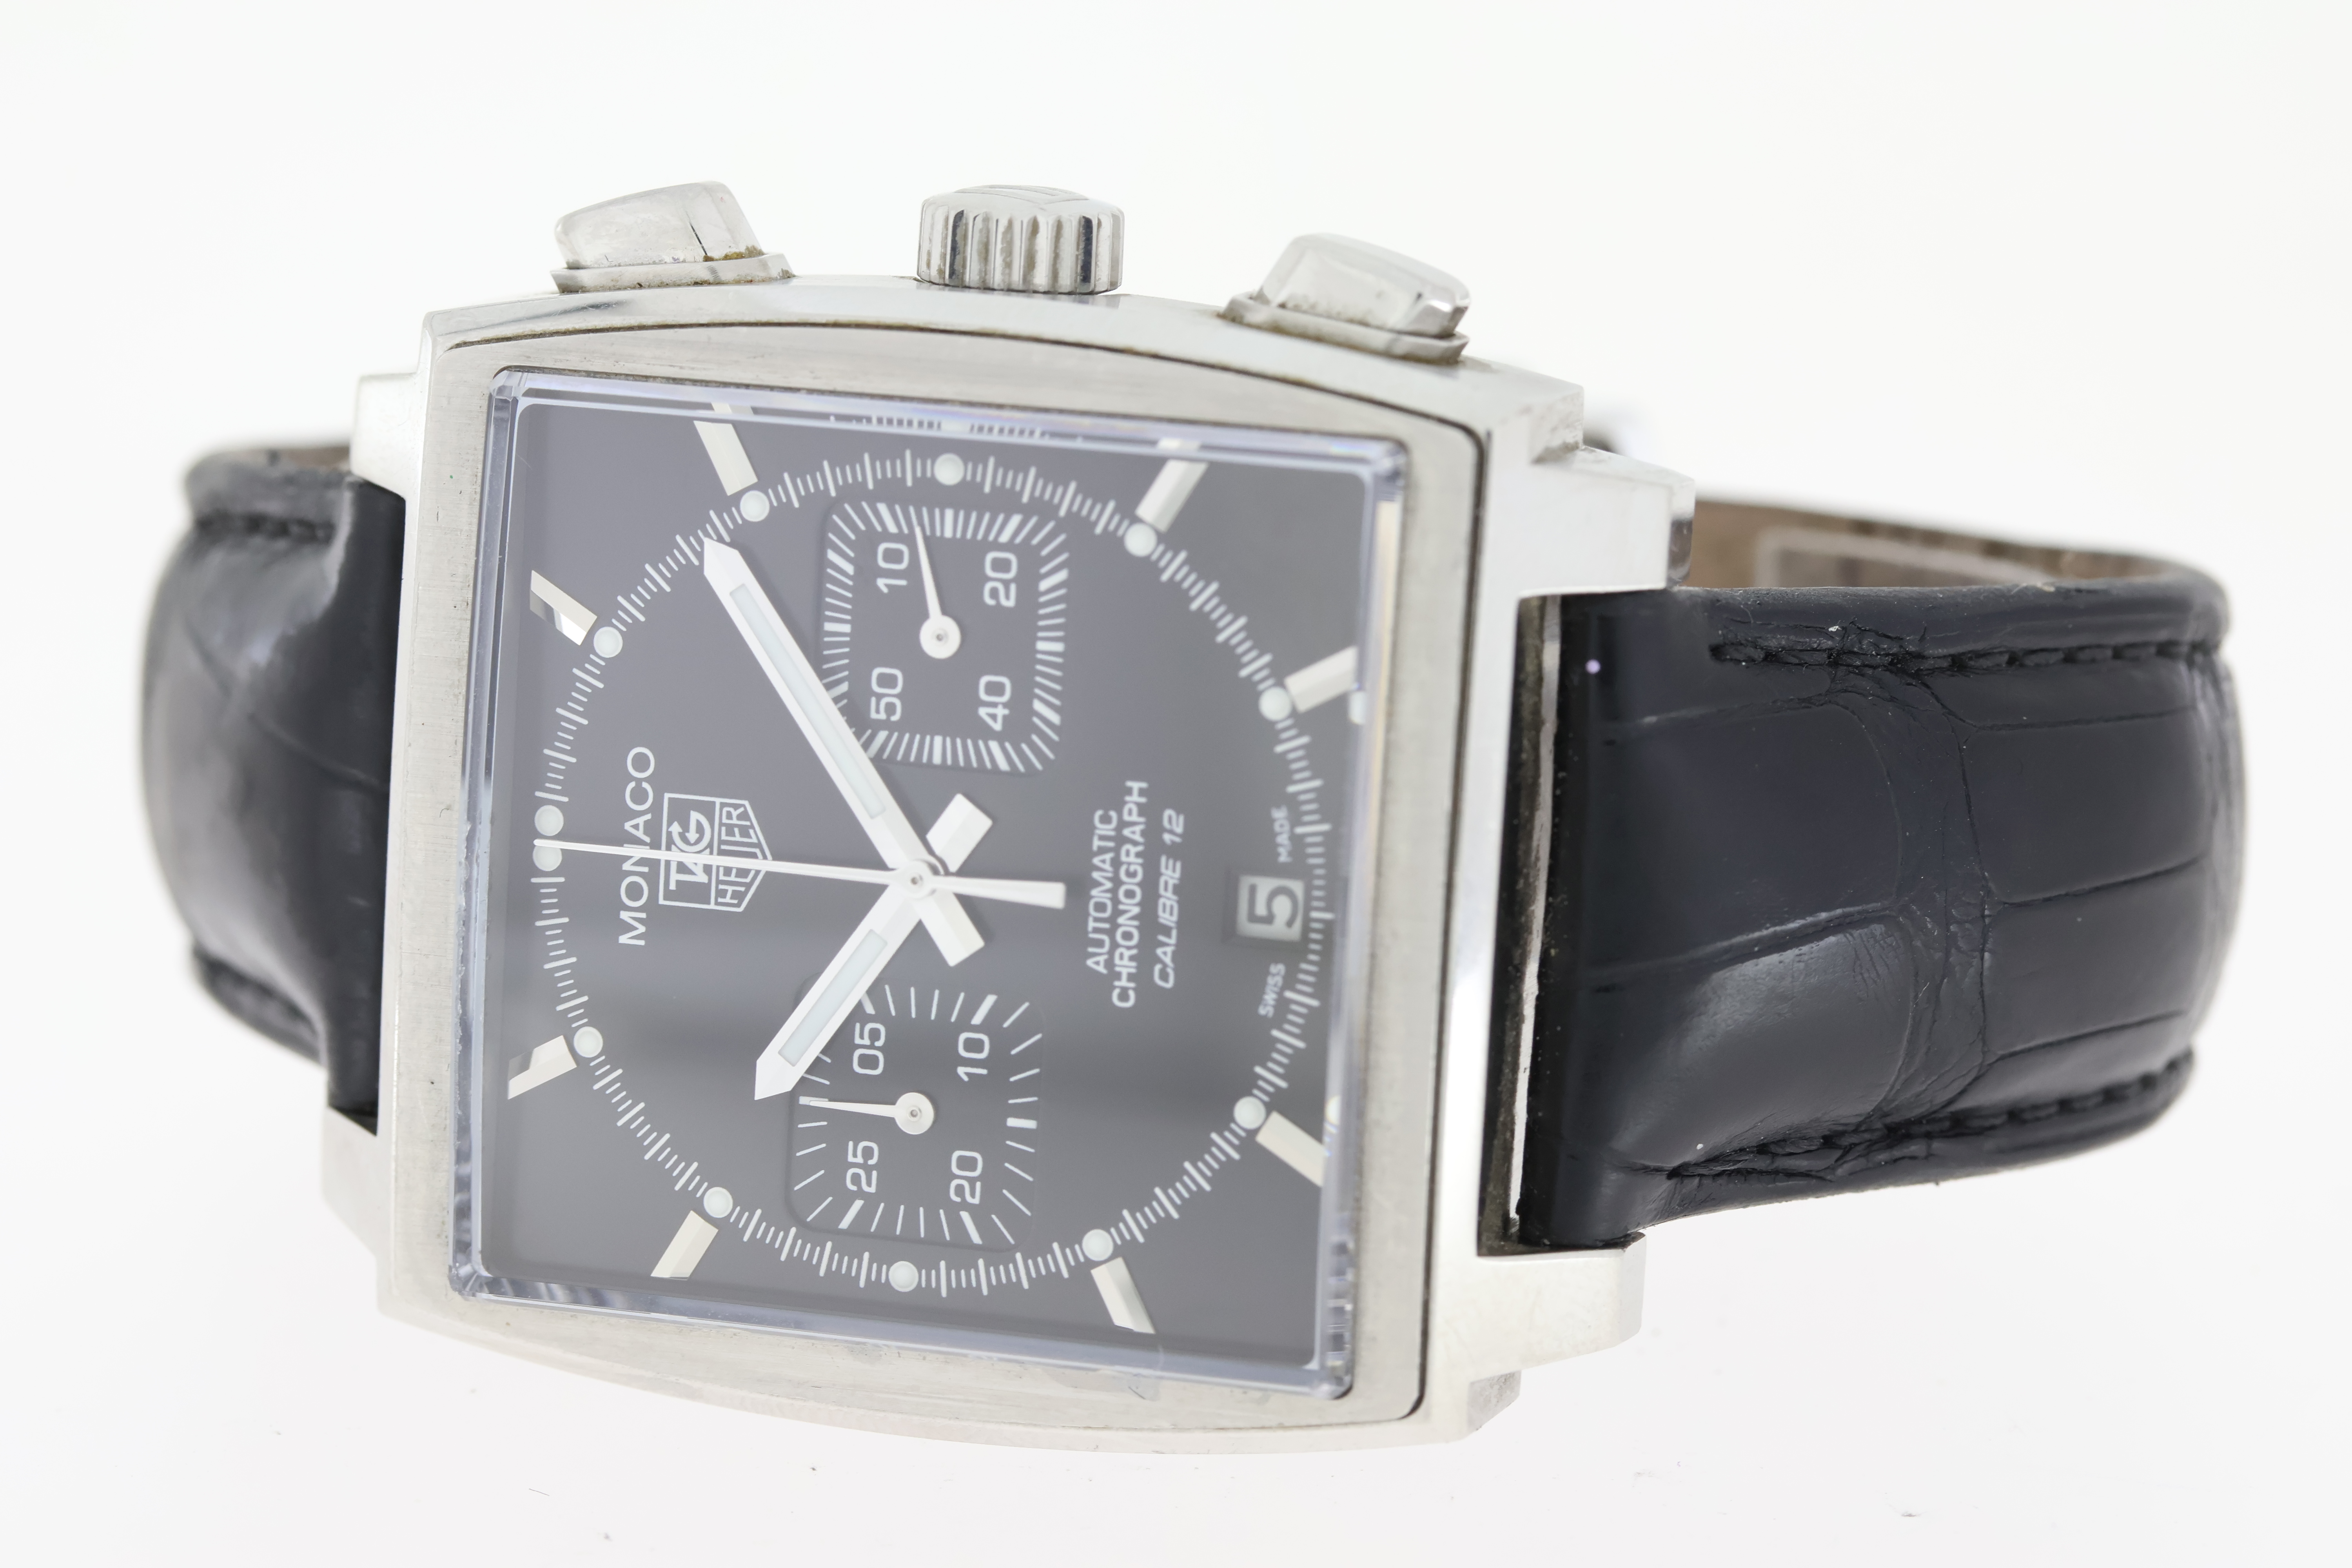 TAG HEUER MONACO CHRONOGRAPH REFERENCE CAW2110 WITH BOX - Image 2 of 4